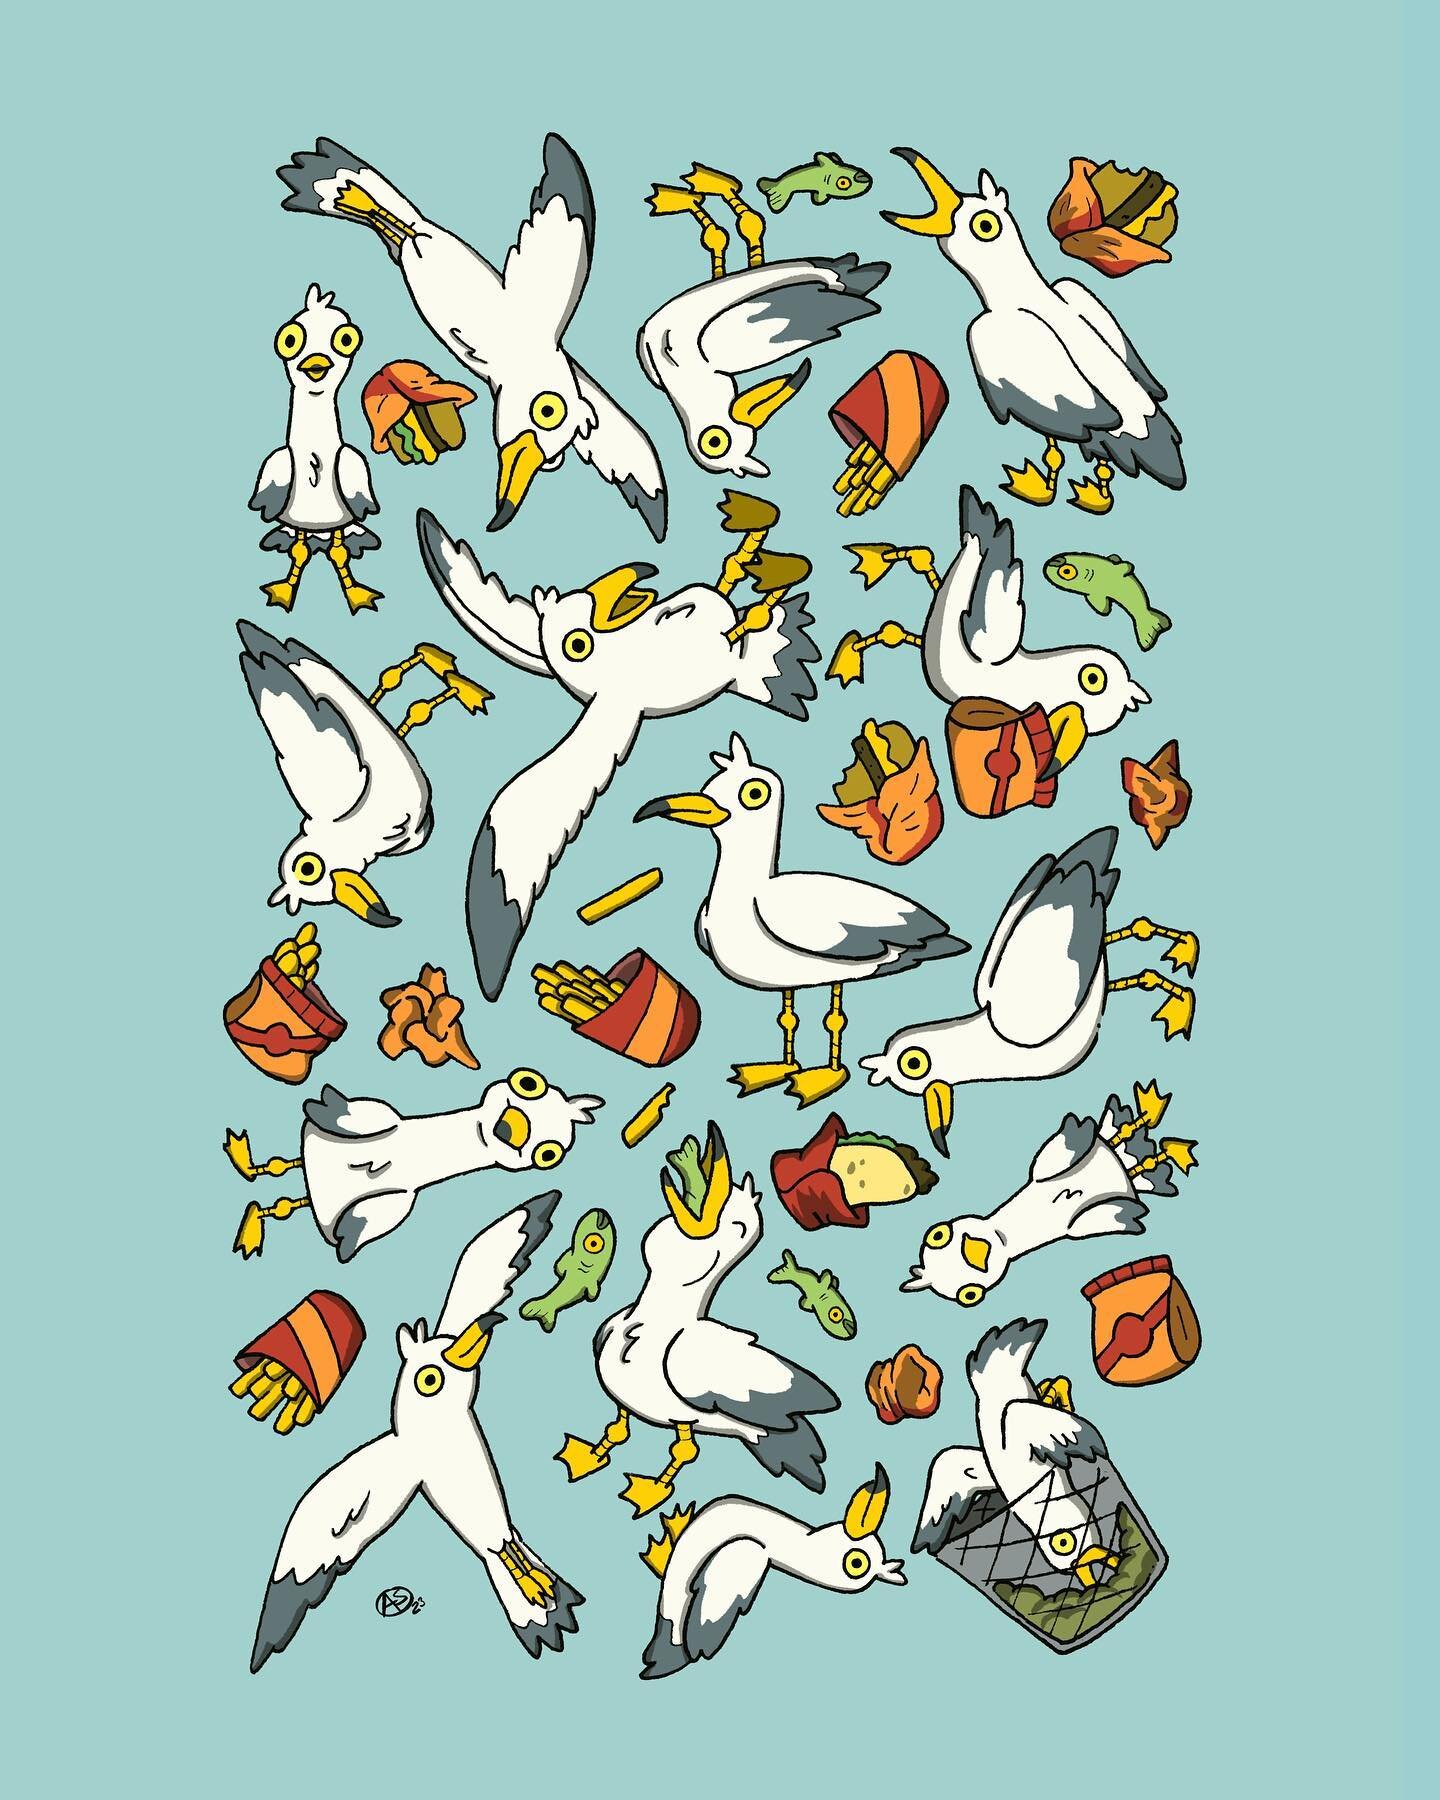 Colored up some recent patterns. Seagulls and Eels.